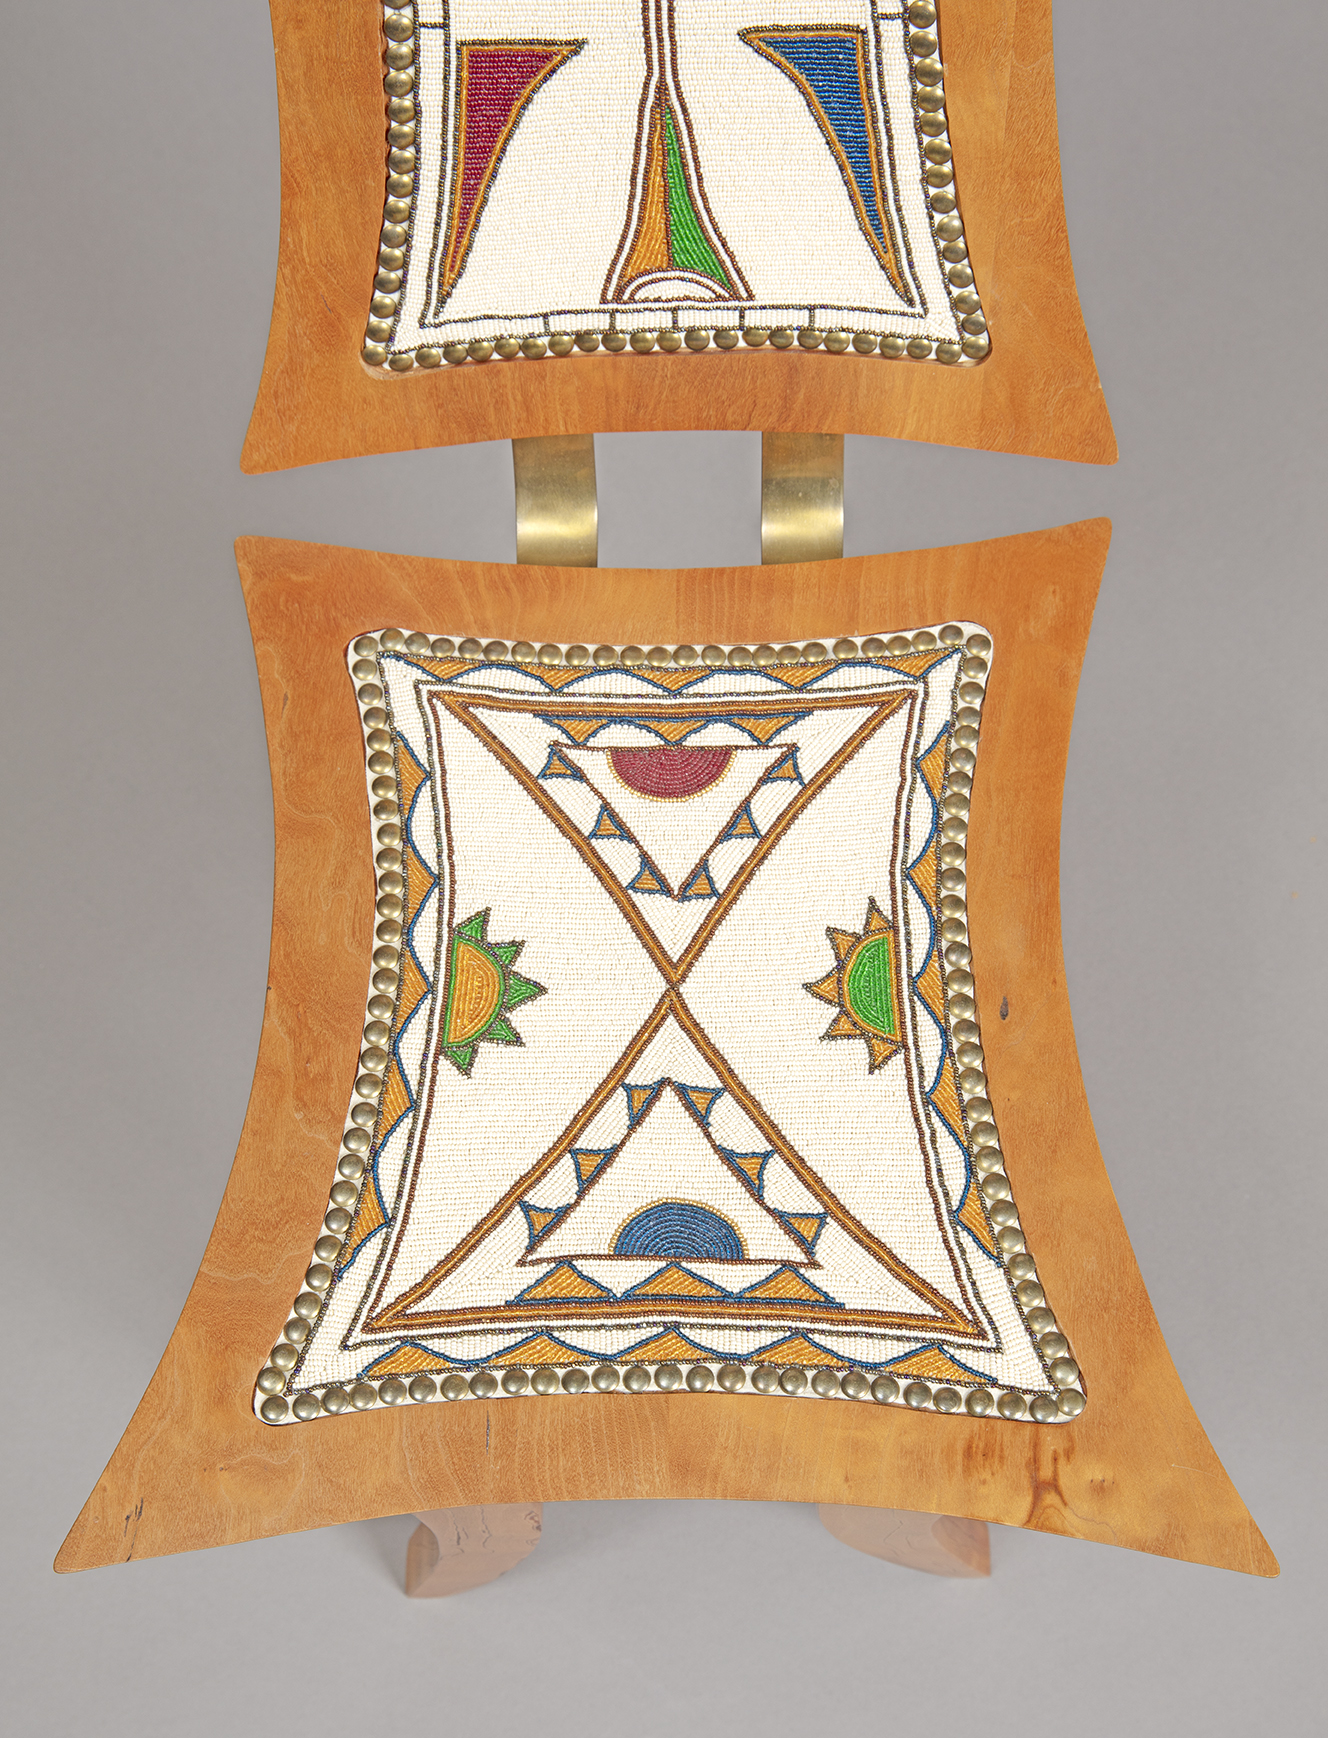 Close-up view of the back and seat of a wooden chair, rectangular shapes with concave edges and, embedded into them on deer hide, glass beads in white, brown, blue, red, green, and orange forming graphic abstract shapes.